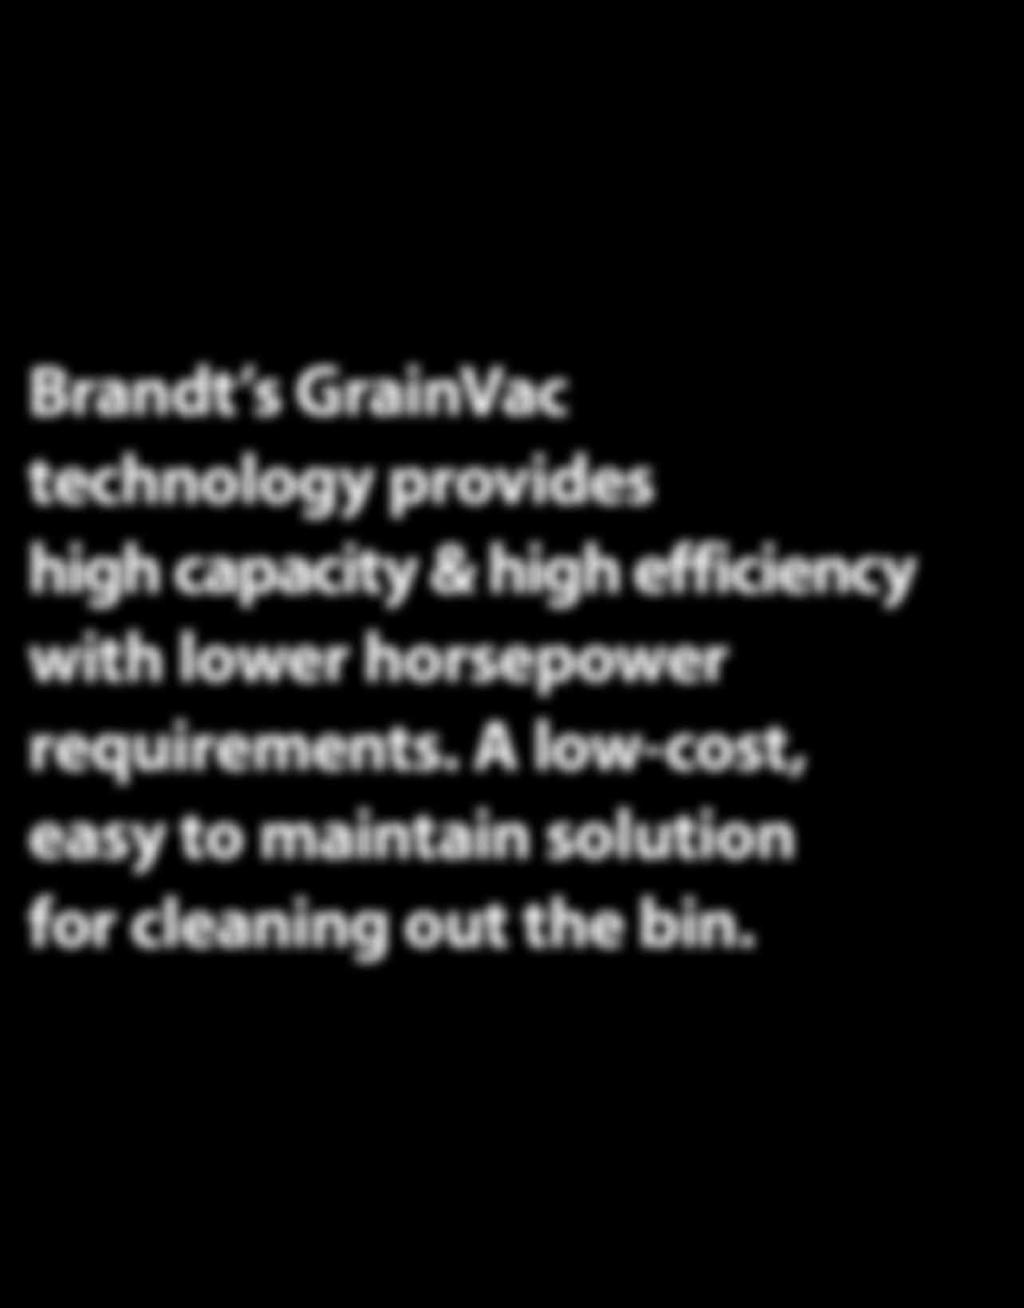 Brandt s GrainVac technology provides high capacity & high efficiency with lower